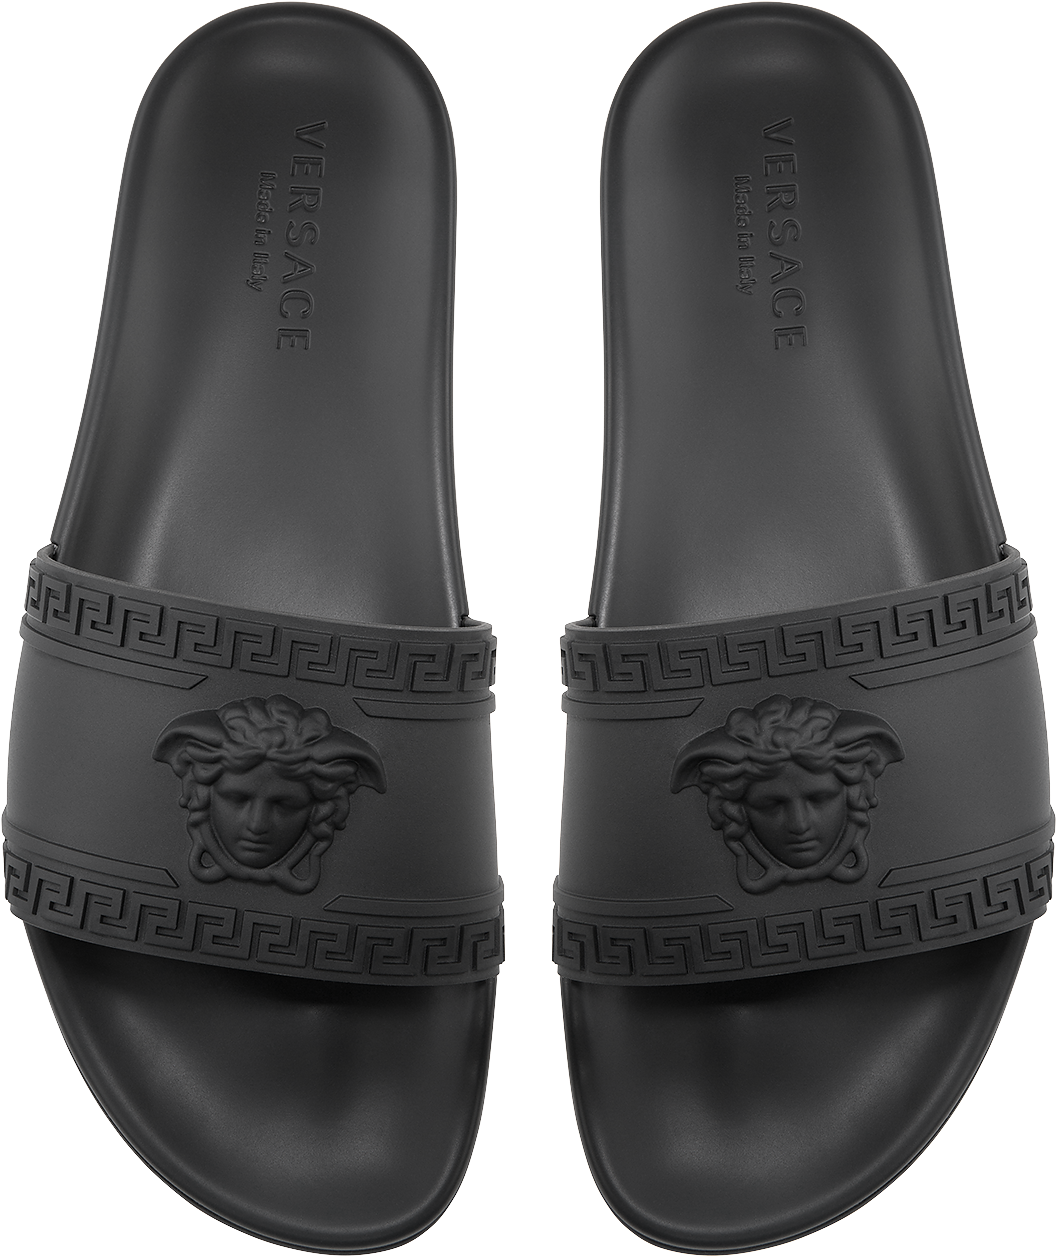 Download Versace Sliders PNG Image with No Background - PNGkey.com